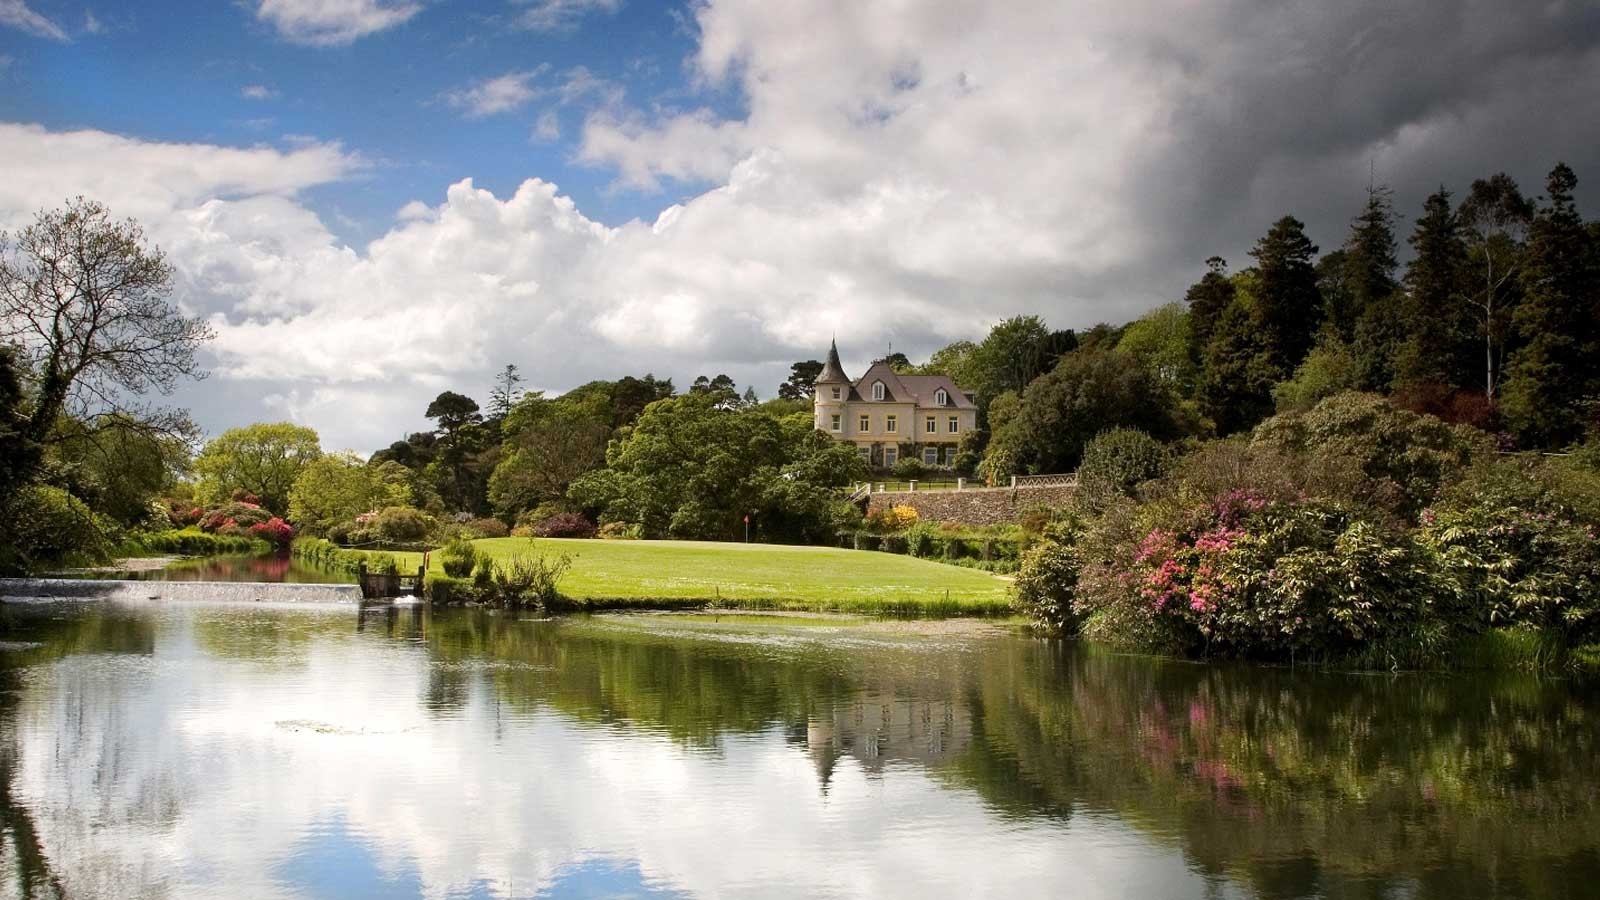 Lissalel House and Gardens - Historic West Cork 350-Acre Estate